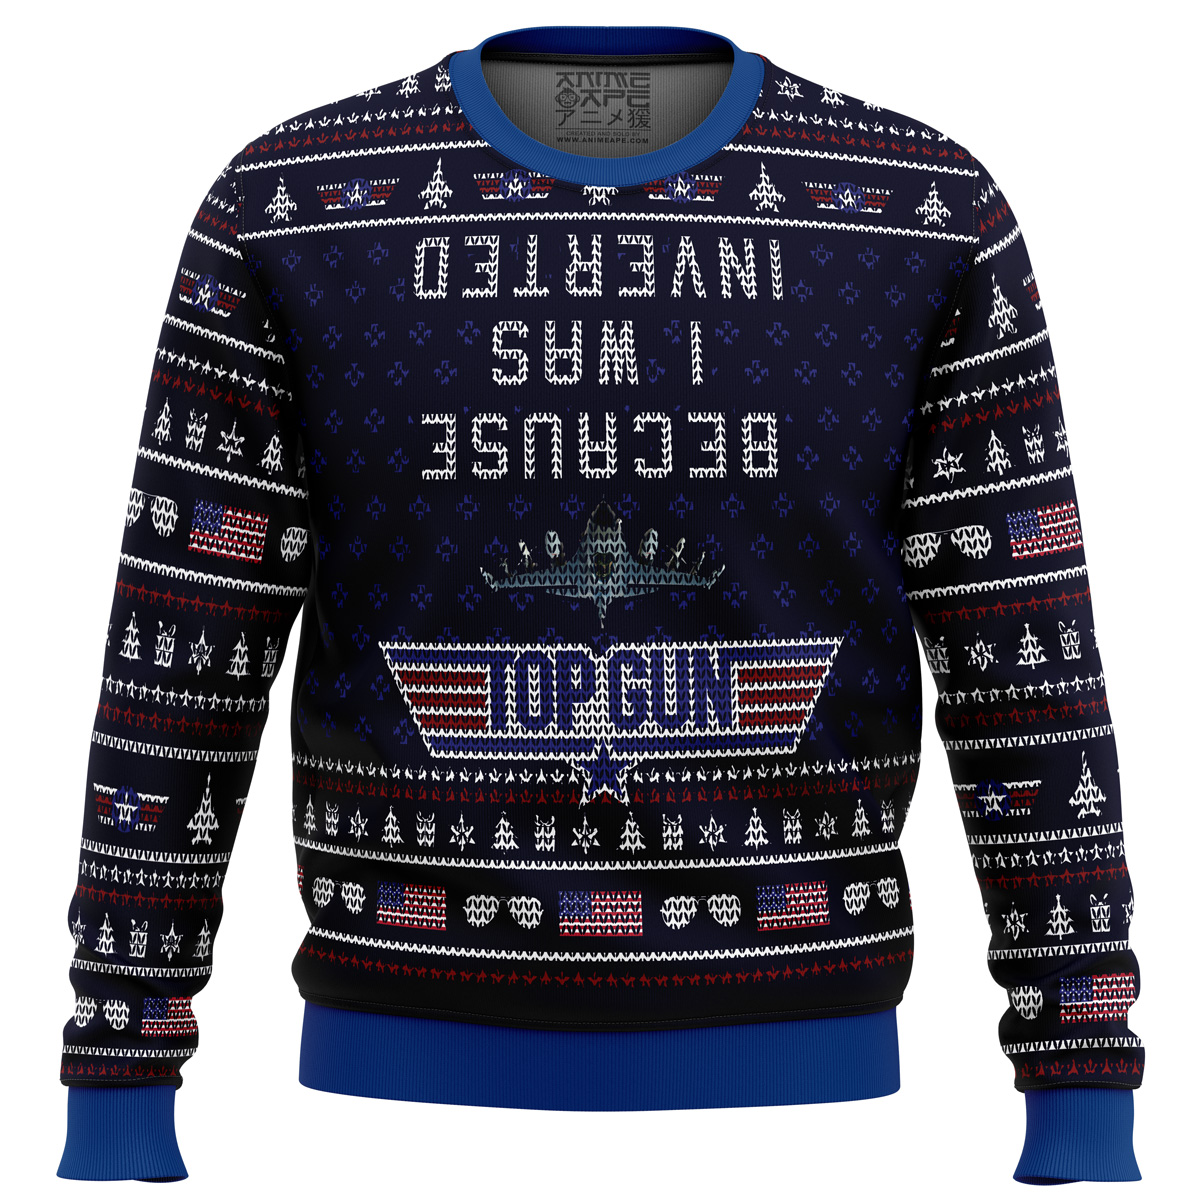 inverted top gun ugly christmas sweater ana2207 7595 - Fandomaniax Store